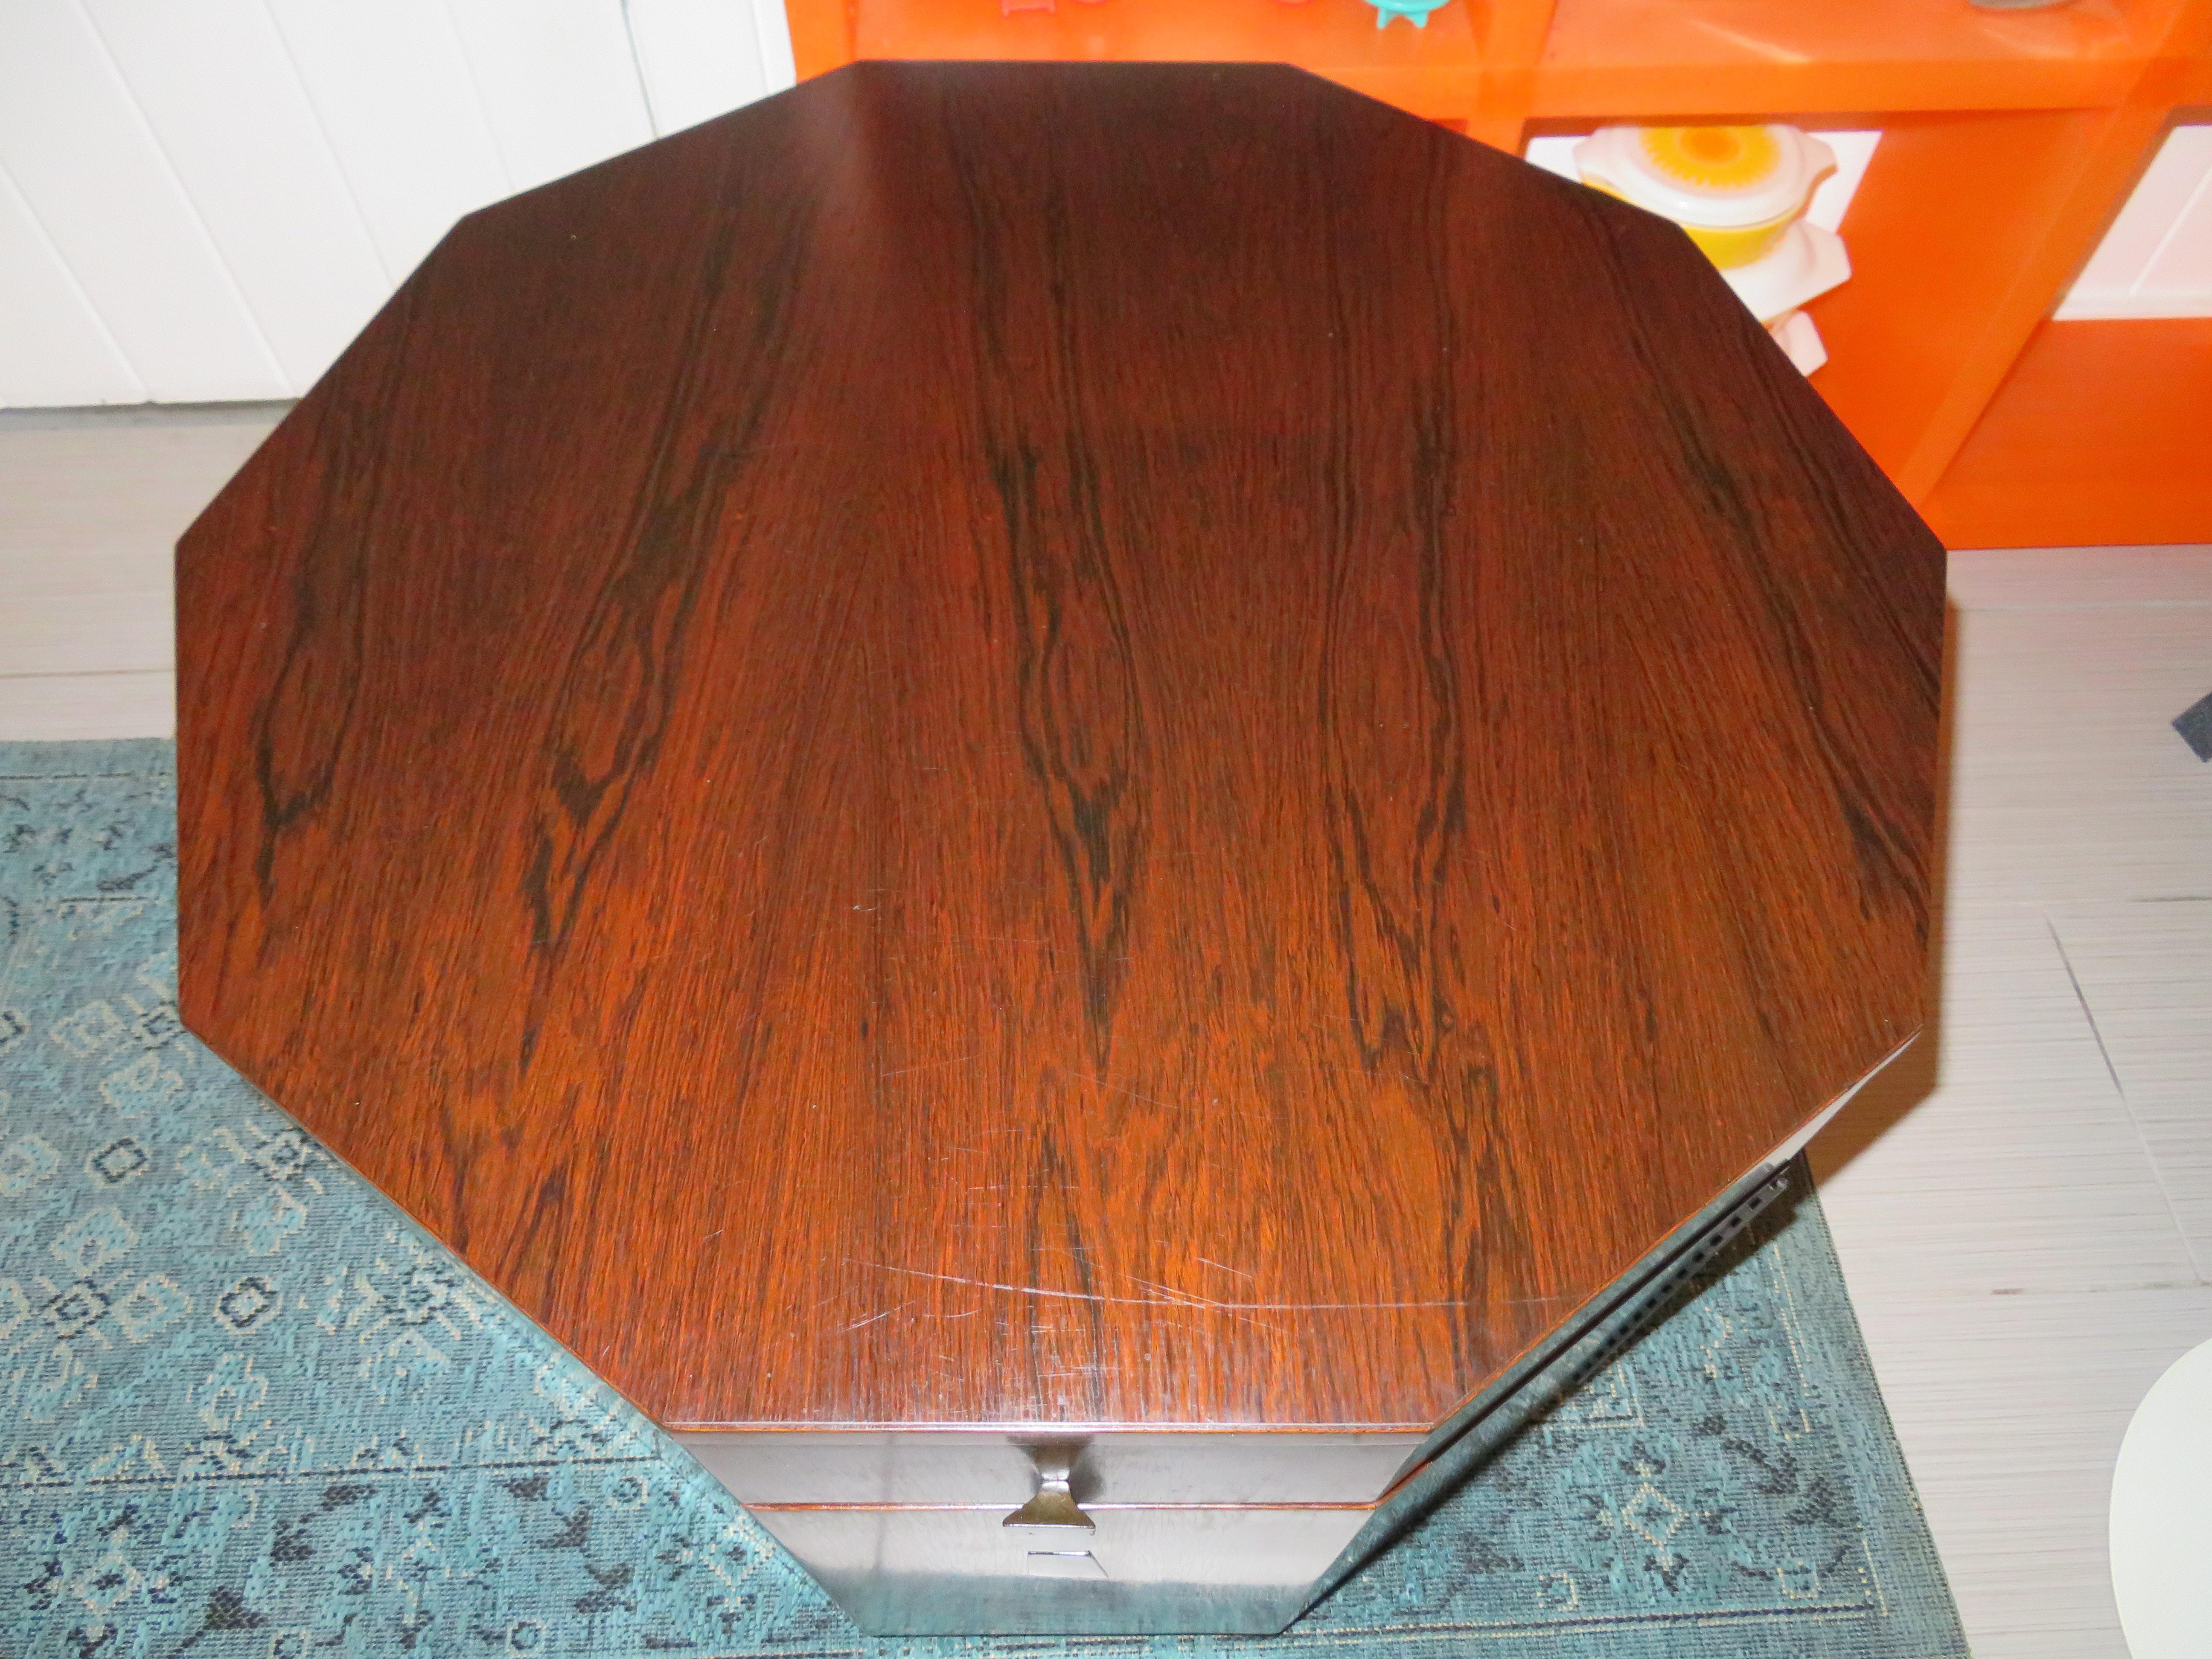 Magnificent Harvey Probber rosewood decagon bar lamp table. This piece is in wonderful vintage condition-possibly the nicest one we have ever seen in original condition. The rosewood is deep dark and richly grained-a true modern treasure!